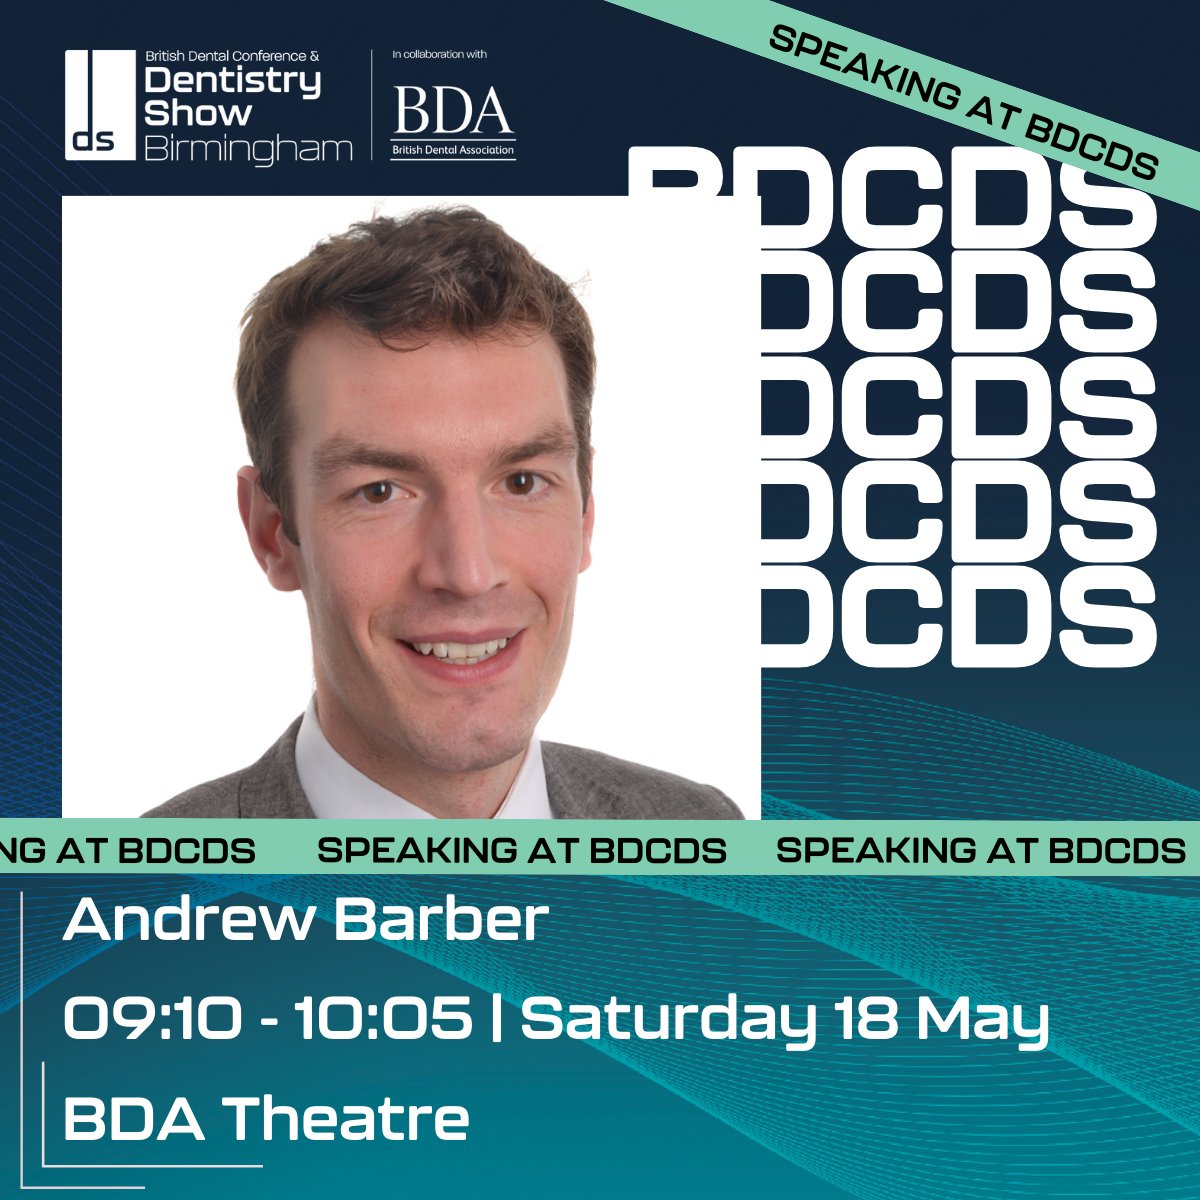 This presentation, aimed at general dental practitioners, examines patients with worn teeth. When should we intervene and how, and how should we manage the occlusion? Join Andrew Barber on 18 May 09:10 at the BDA Theatre. Claim your free pass today: bit.ly/3Ukpz07